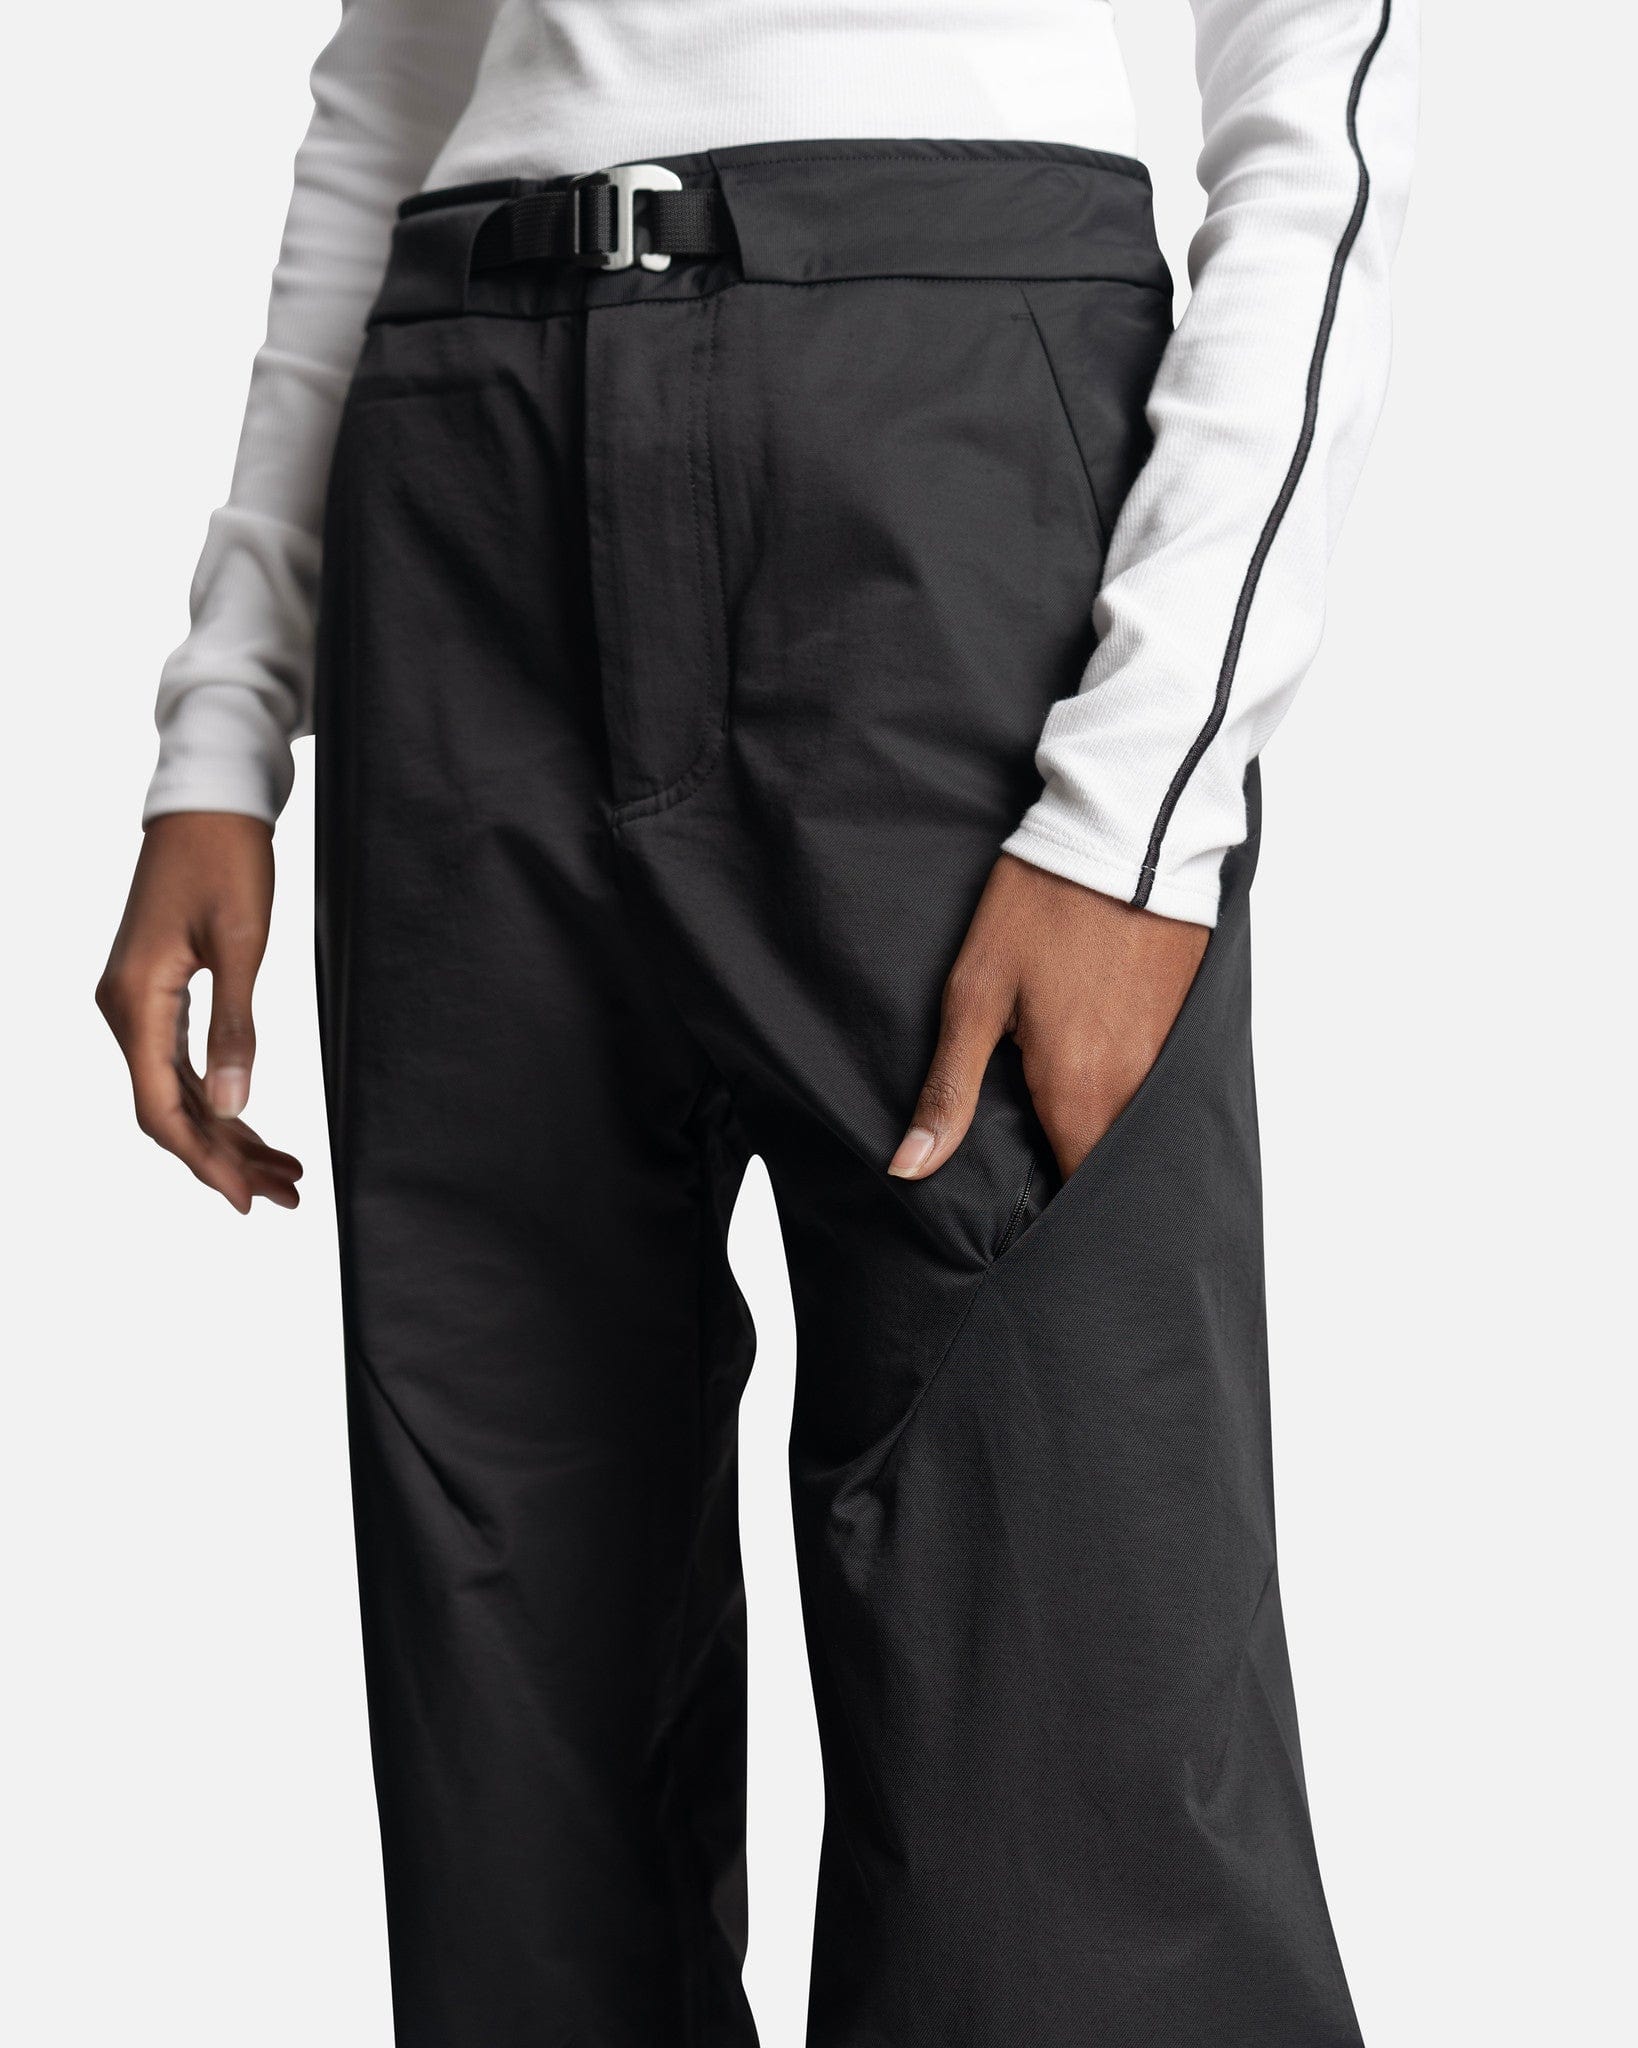 POST ARCHIVE FACTION (P.A.F) Women Pants 5.0 Technical Pants Right in Black